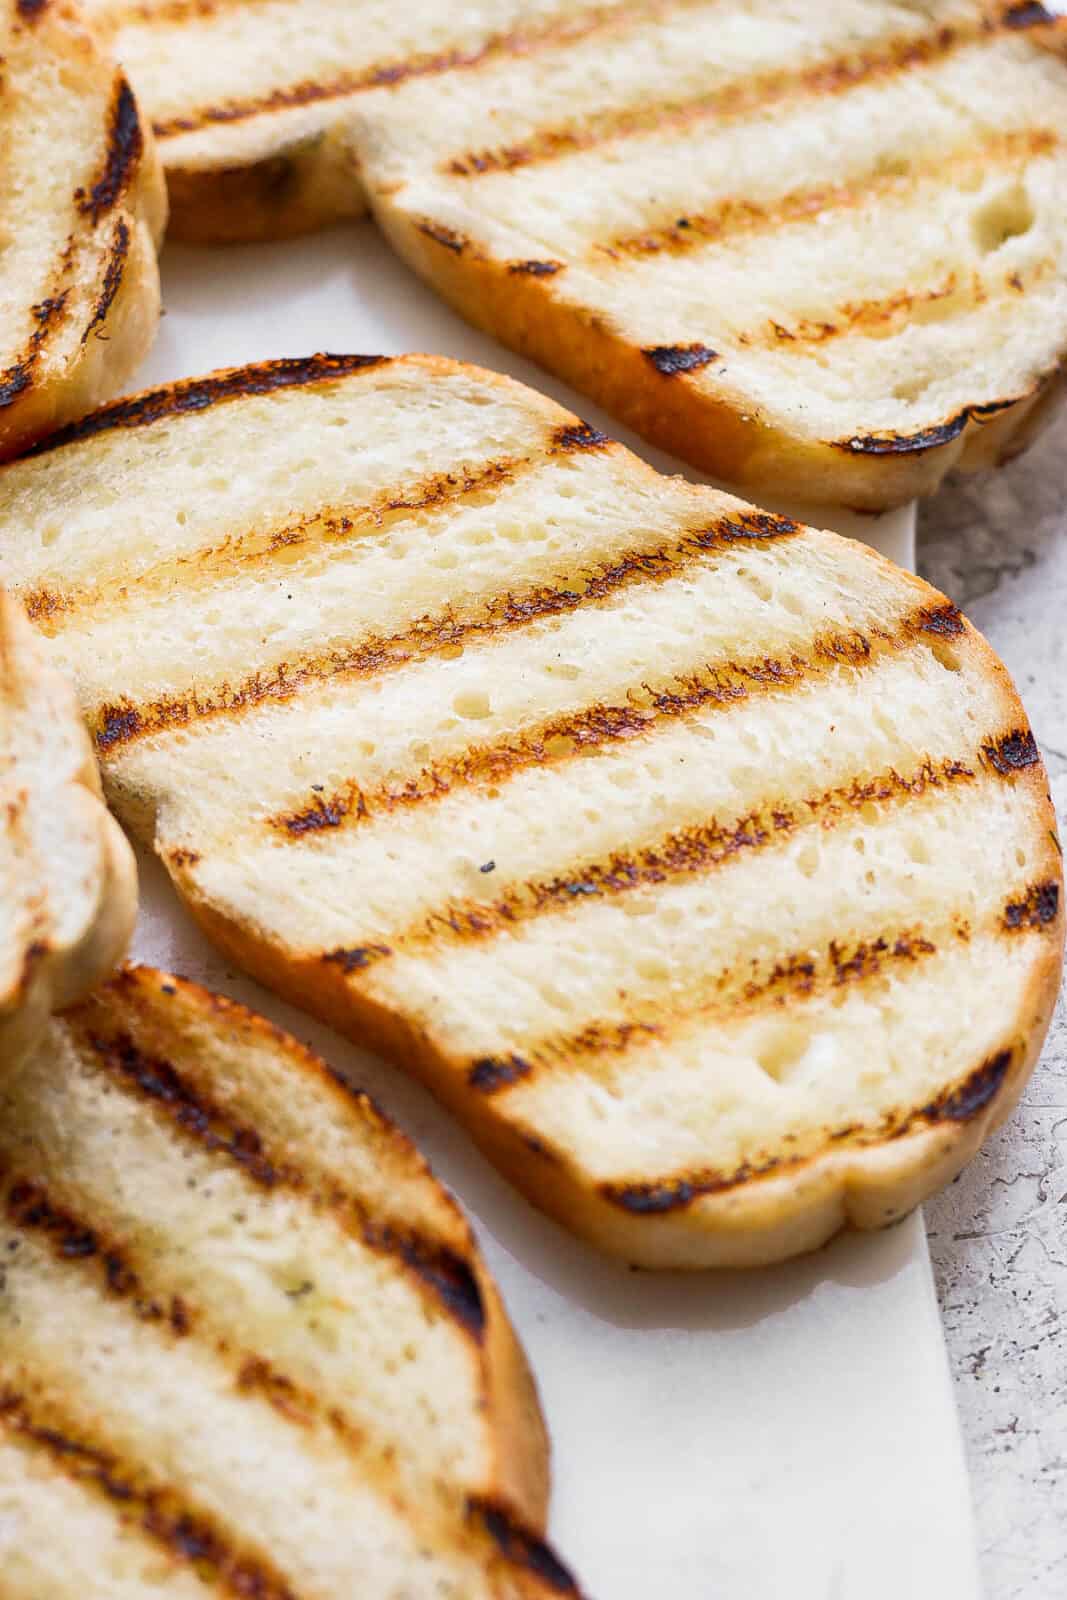 Grilled bread on a plate.